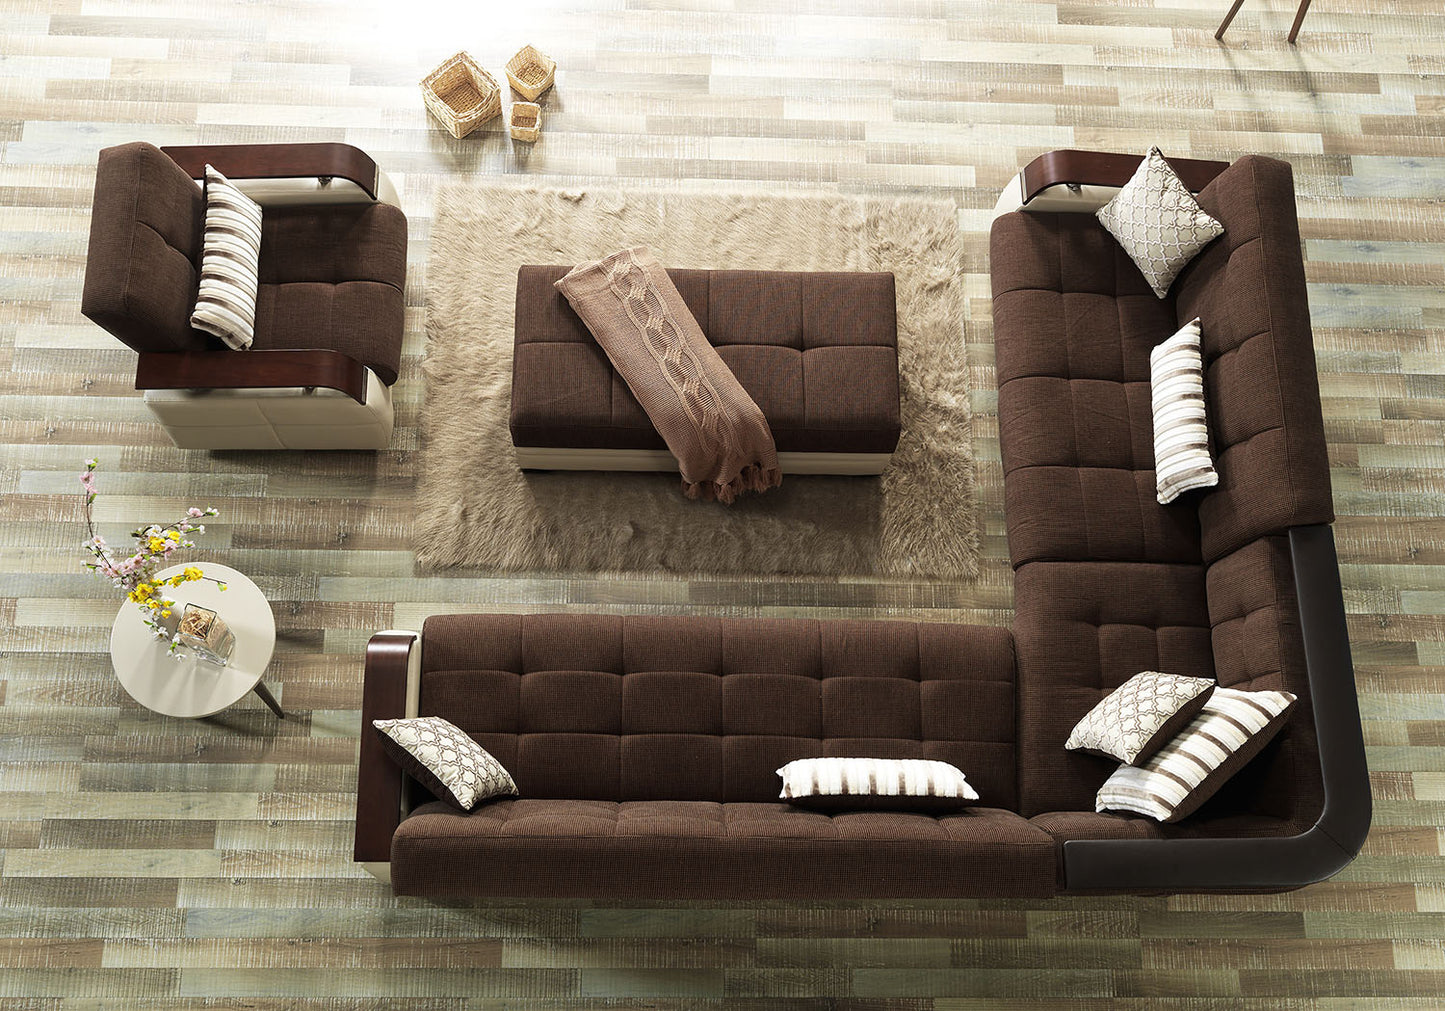 Dogal Contemporary Convertible Sectional - Made in Italy